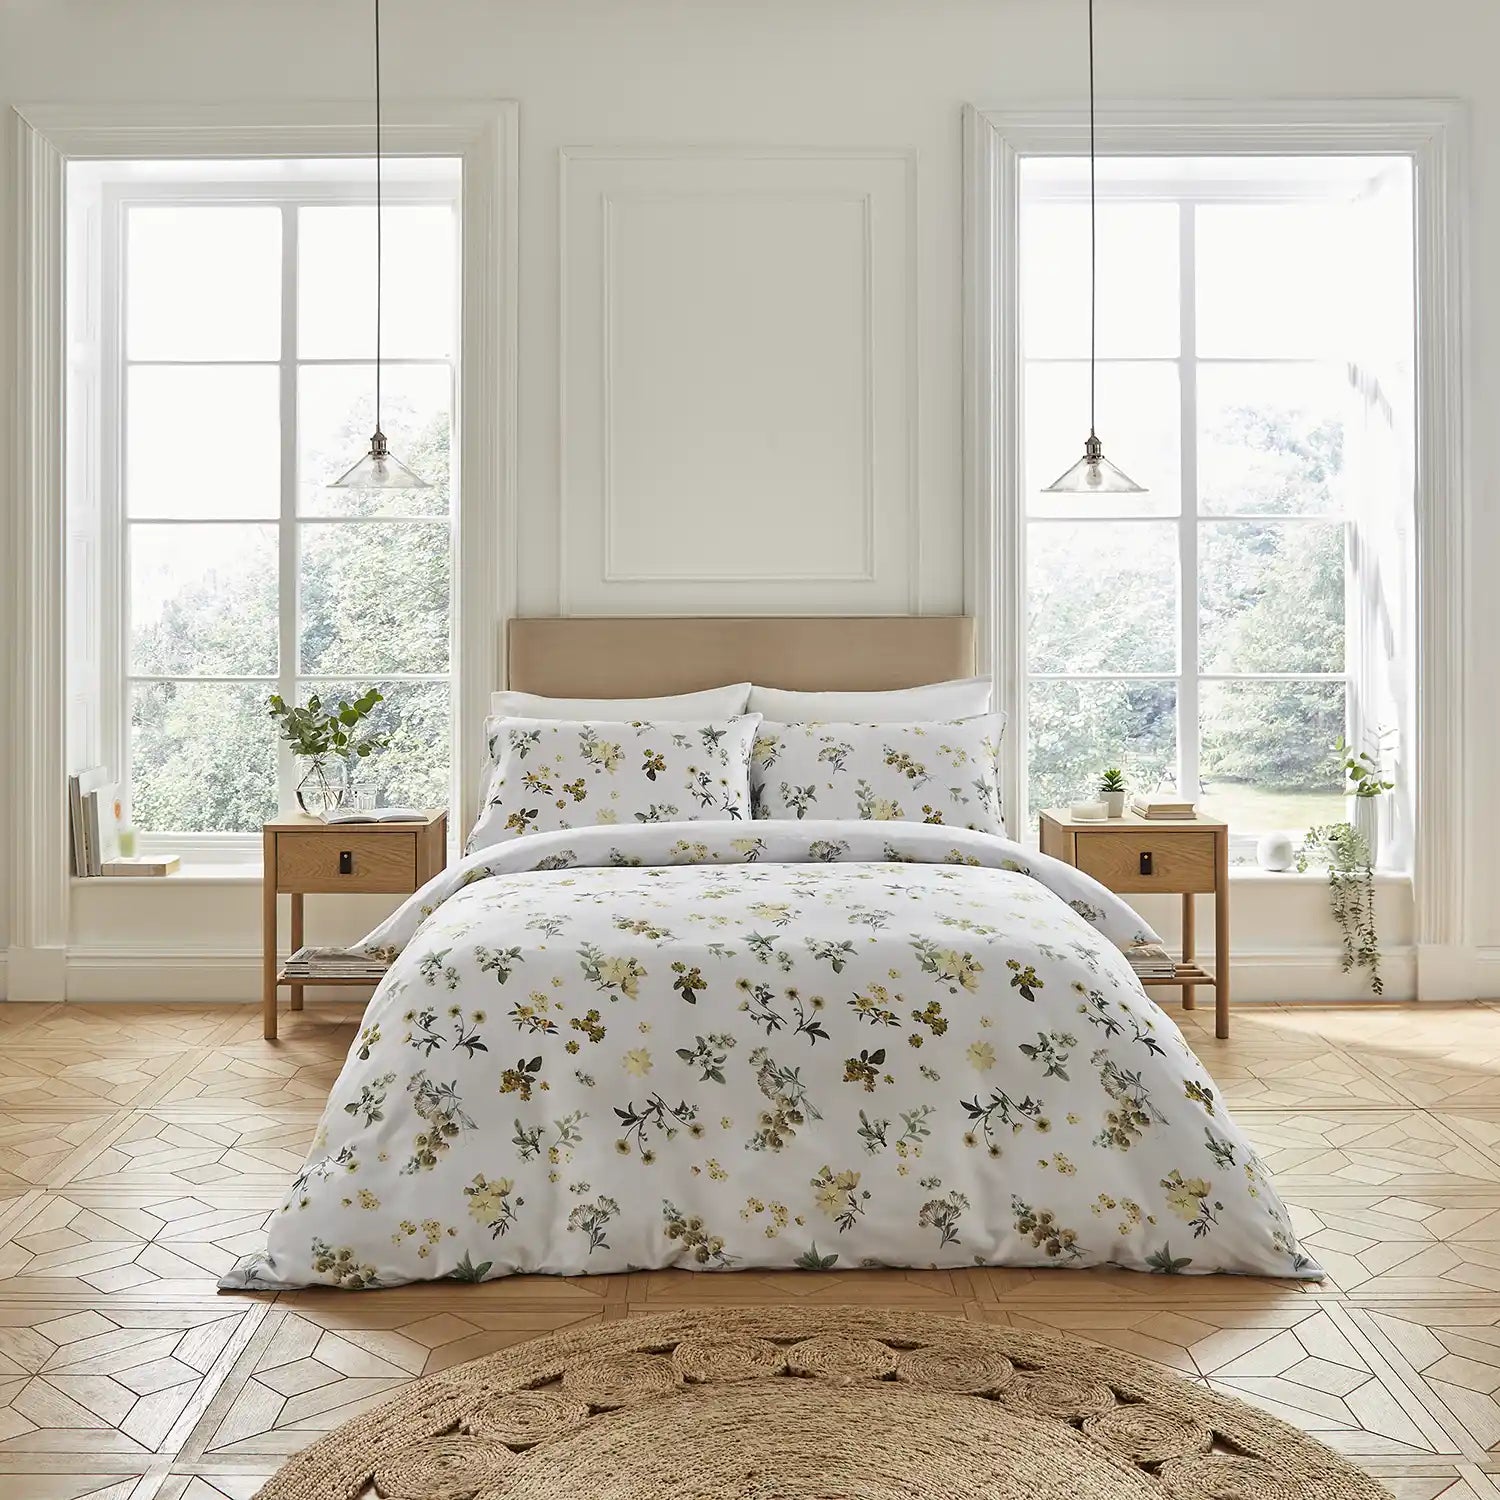  Dorma 300 Thread Count Pure Cotton Sateen Tabitha Floral Duvet Cover - White/Floral 2 Shaws Department Stores